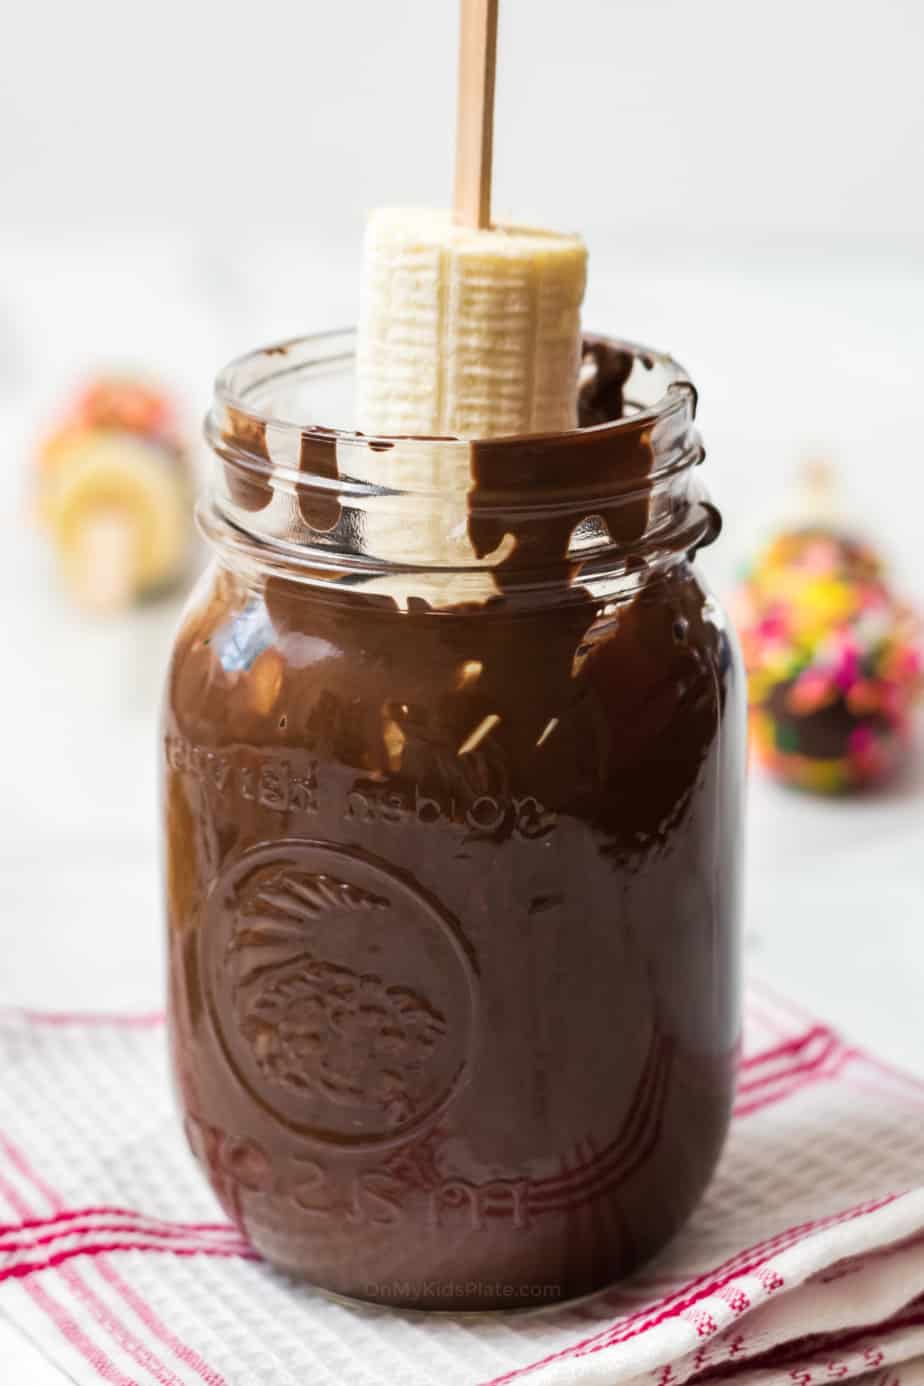 Banana on a stick being dipped in large jar of chocolate.